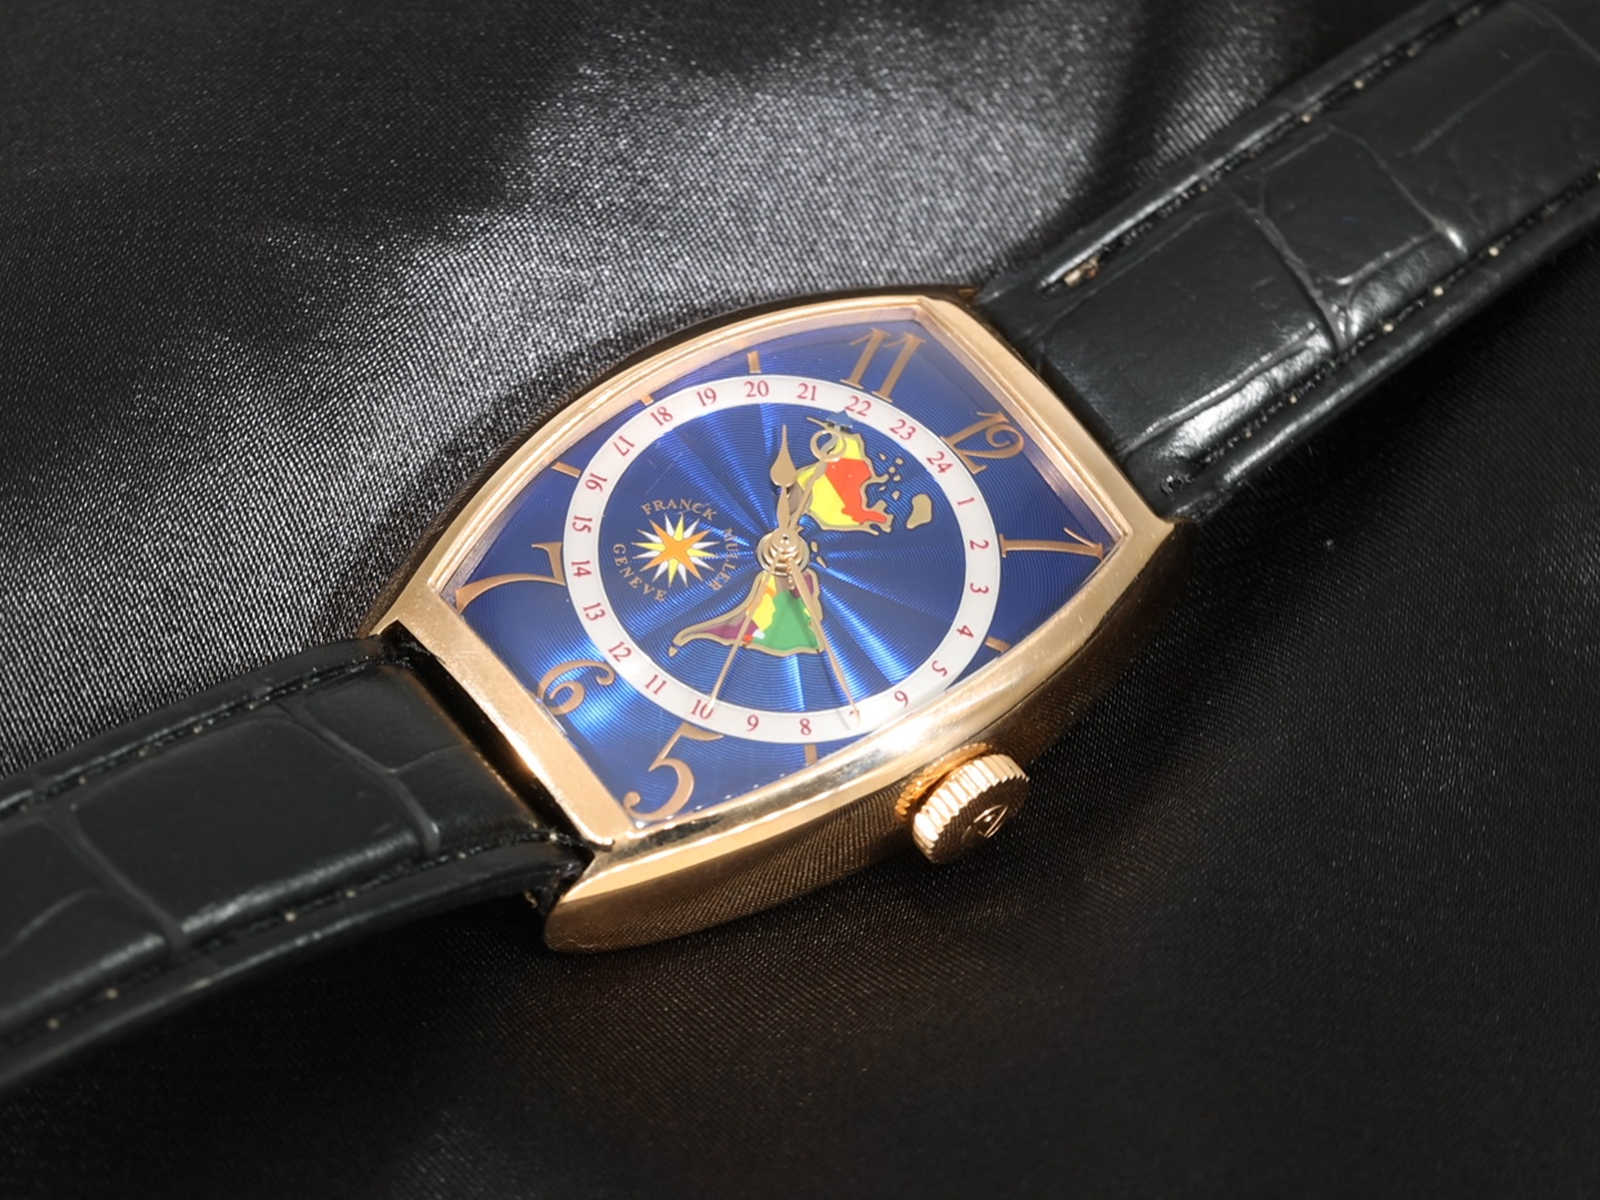 Wristwatch: extremely rare chronometer, Franck Muller Cloisonne "Americas" GMT Ref. 5850 WW, 18K pin - Image 7 of 9